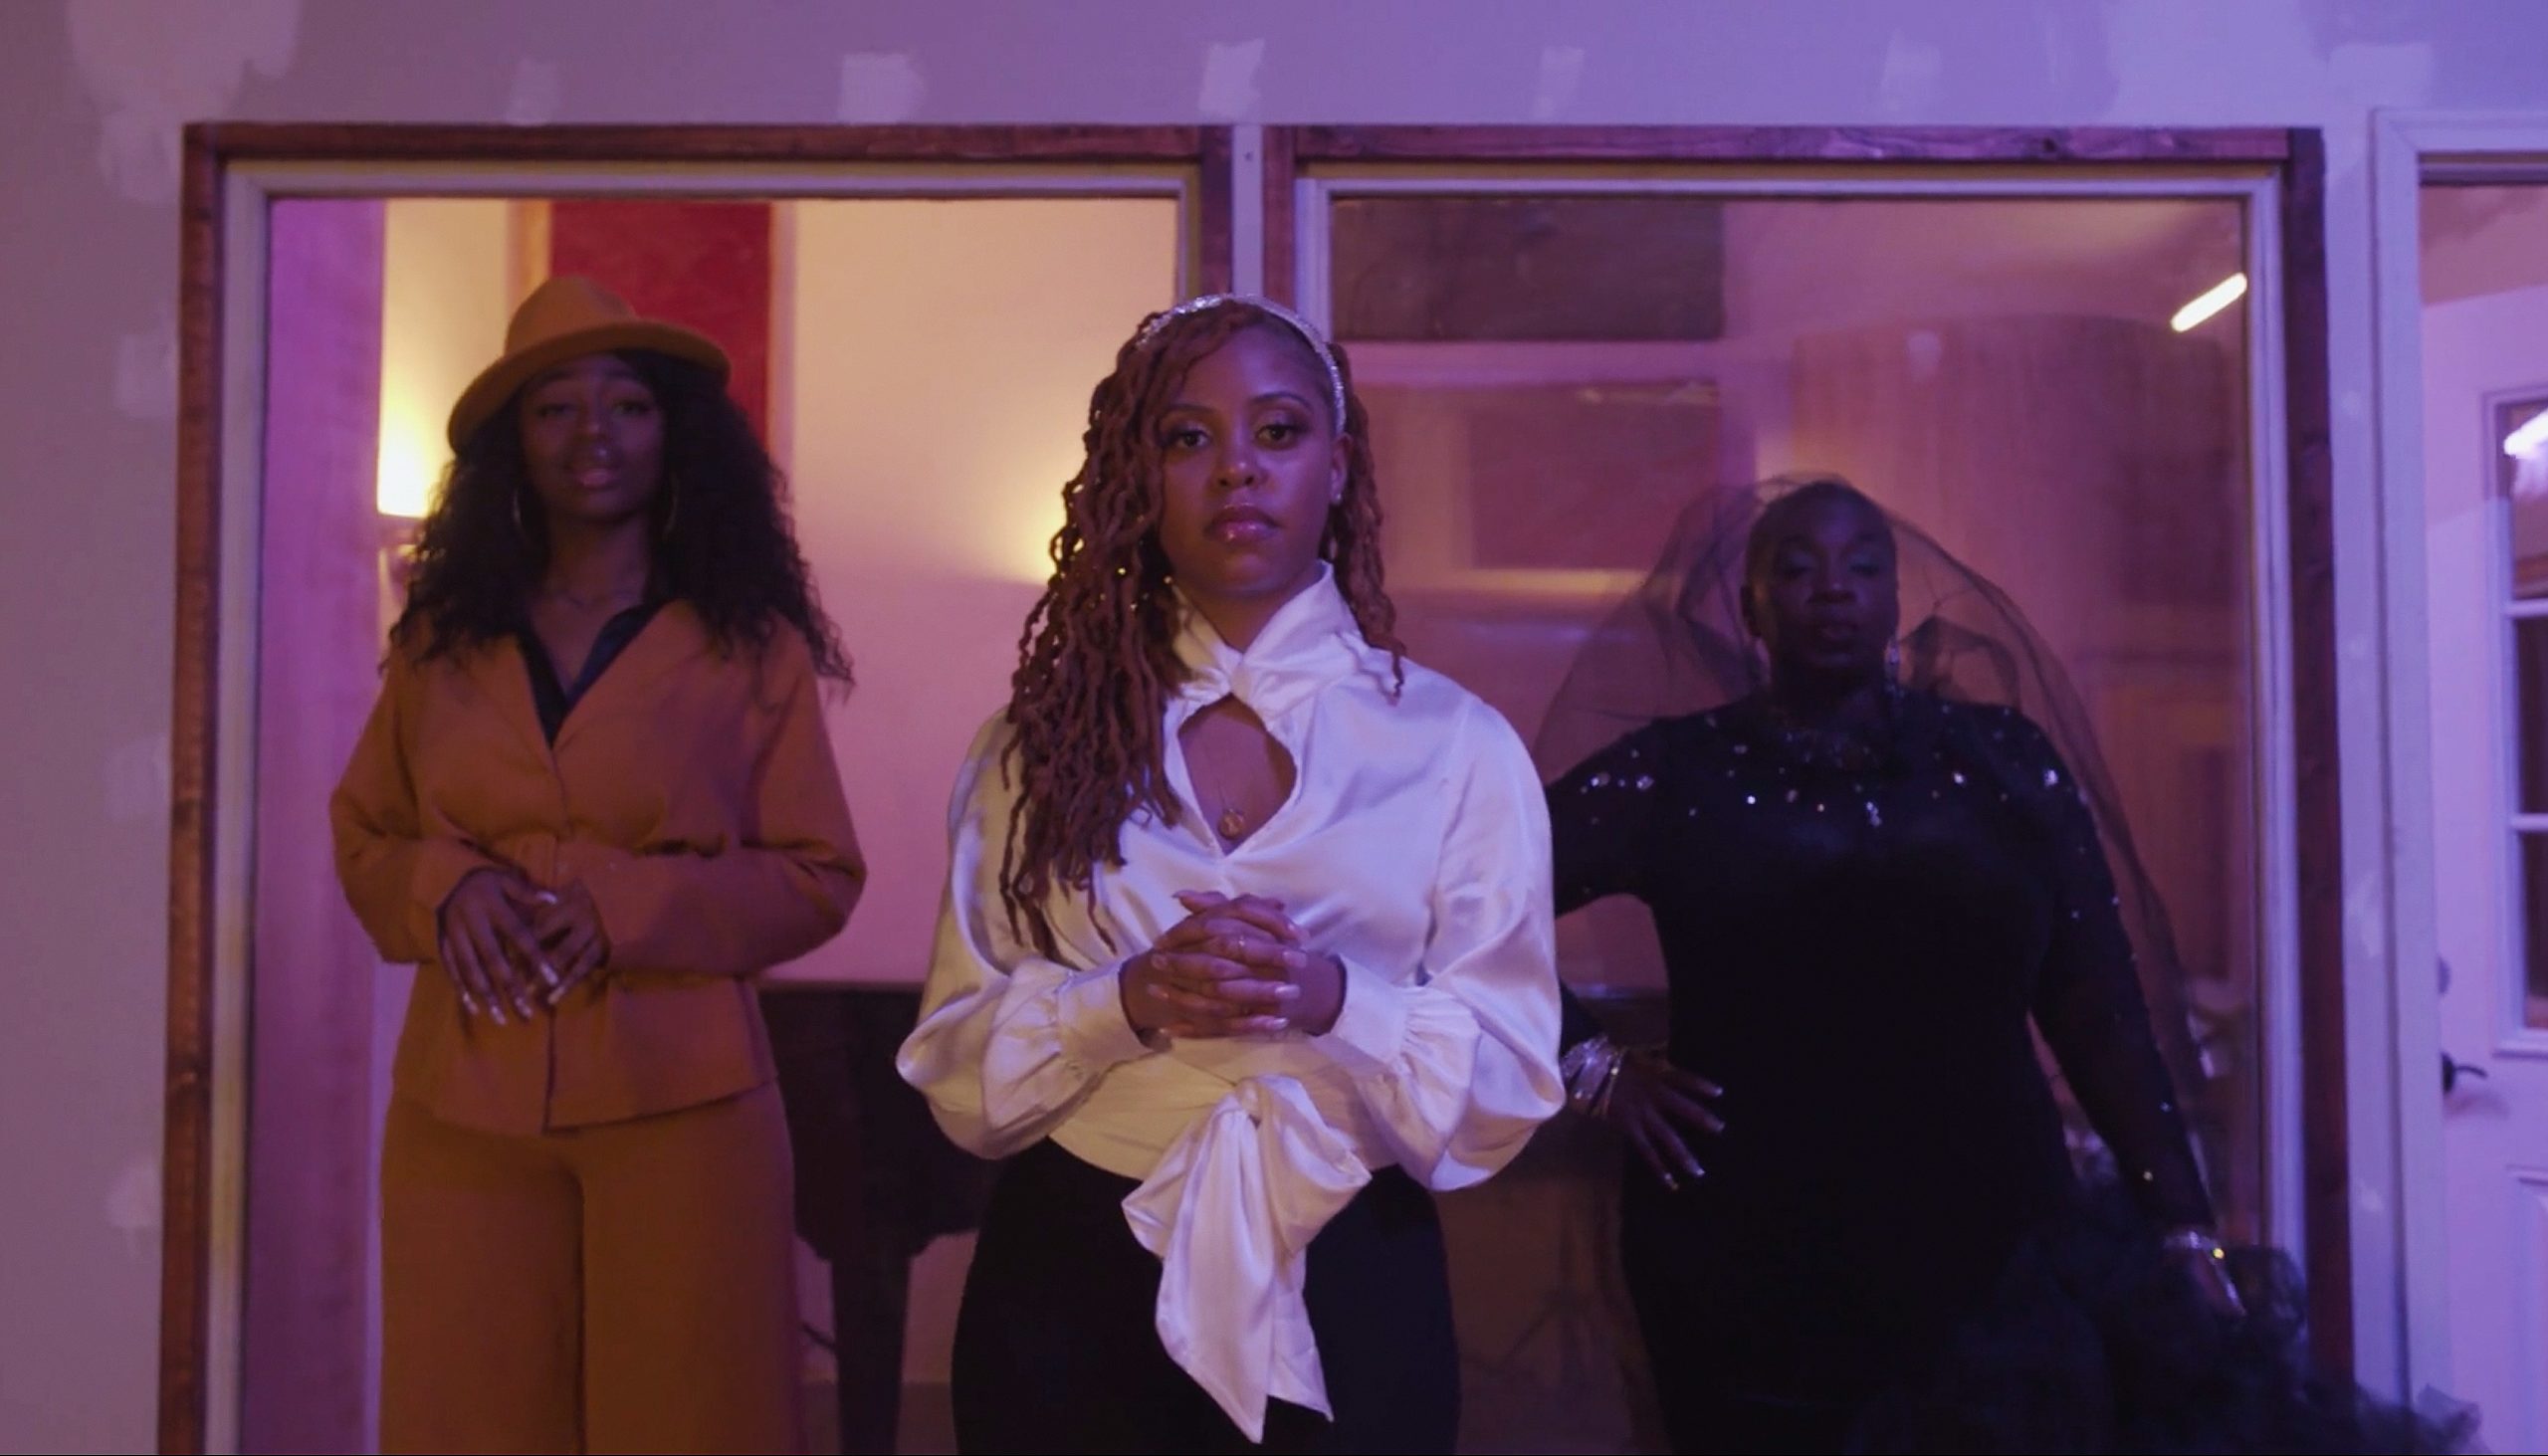 MAC Sponsored a Music Video to Help Create Opportunities for Black Women in Theater